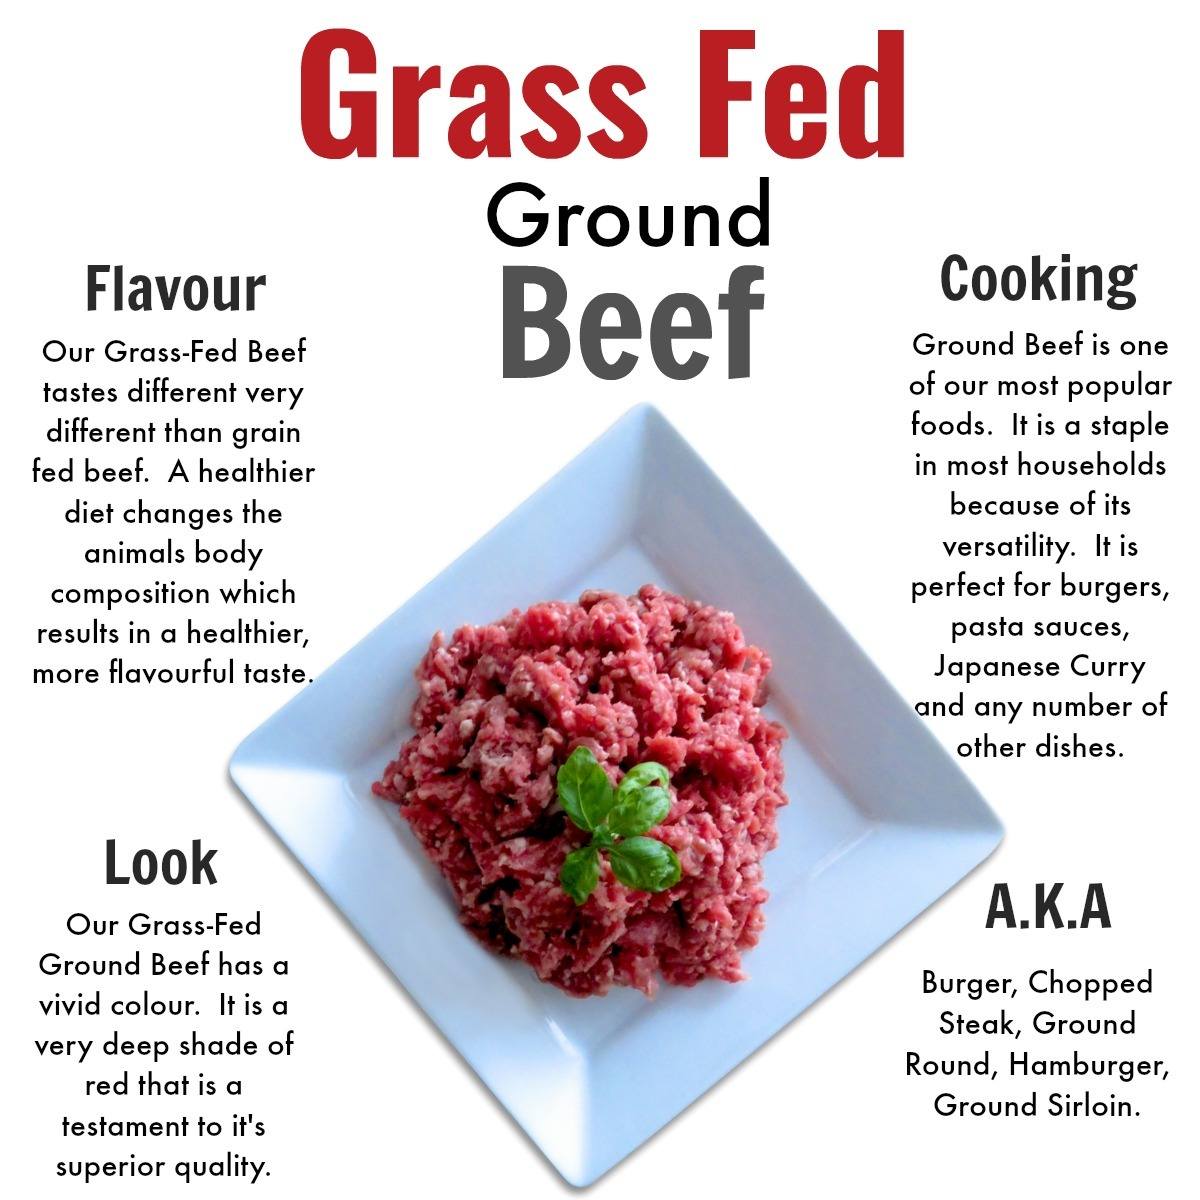 Affordable grass-fed beef delivery near me, steaks, ground beef and more - Nutrafams - Grassfed Ground Beef 2